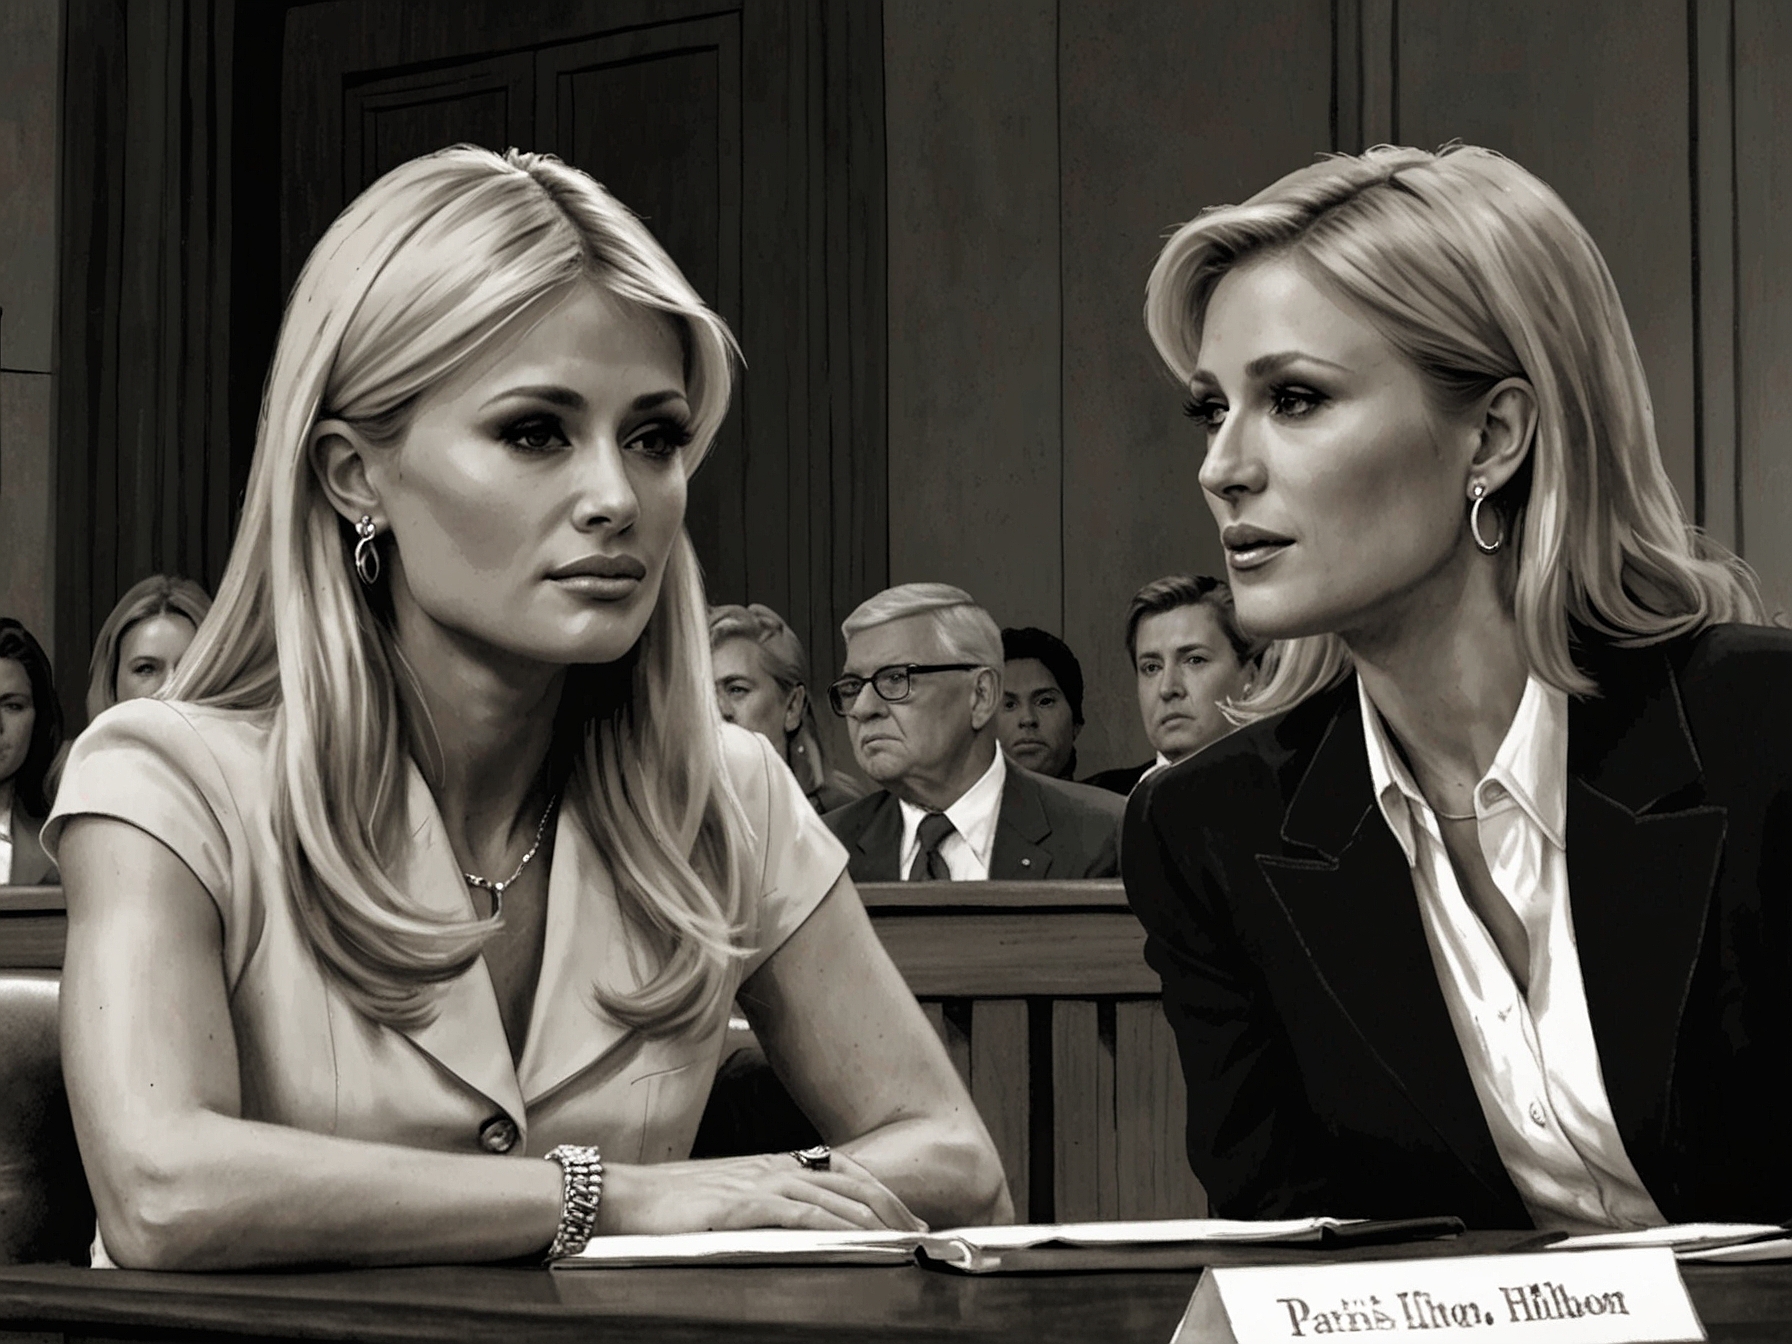 Paris Hilton speaking with a noticeably deeper and more authoritative voice during the congressional hearing, with Representative Claudia Tenney listening attentively, showing their serious discussion.